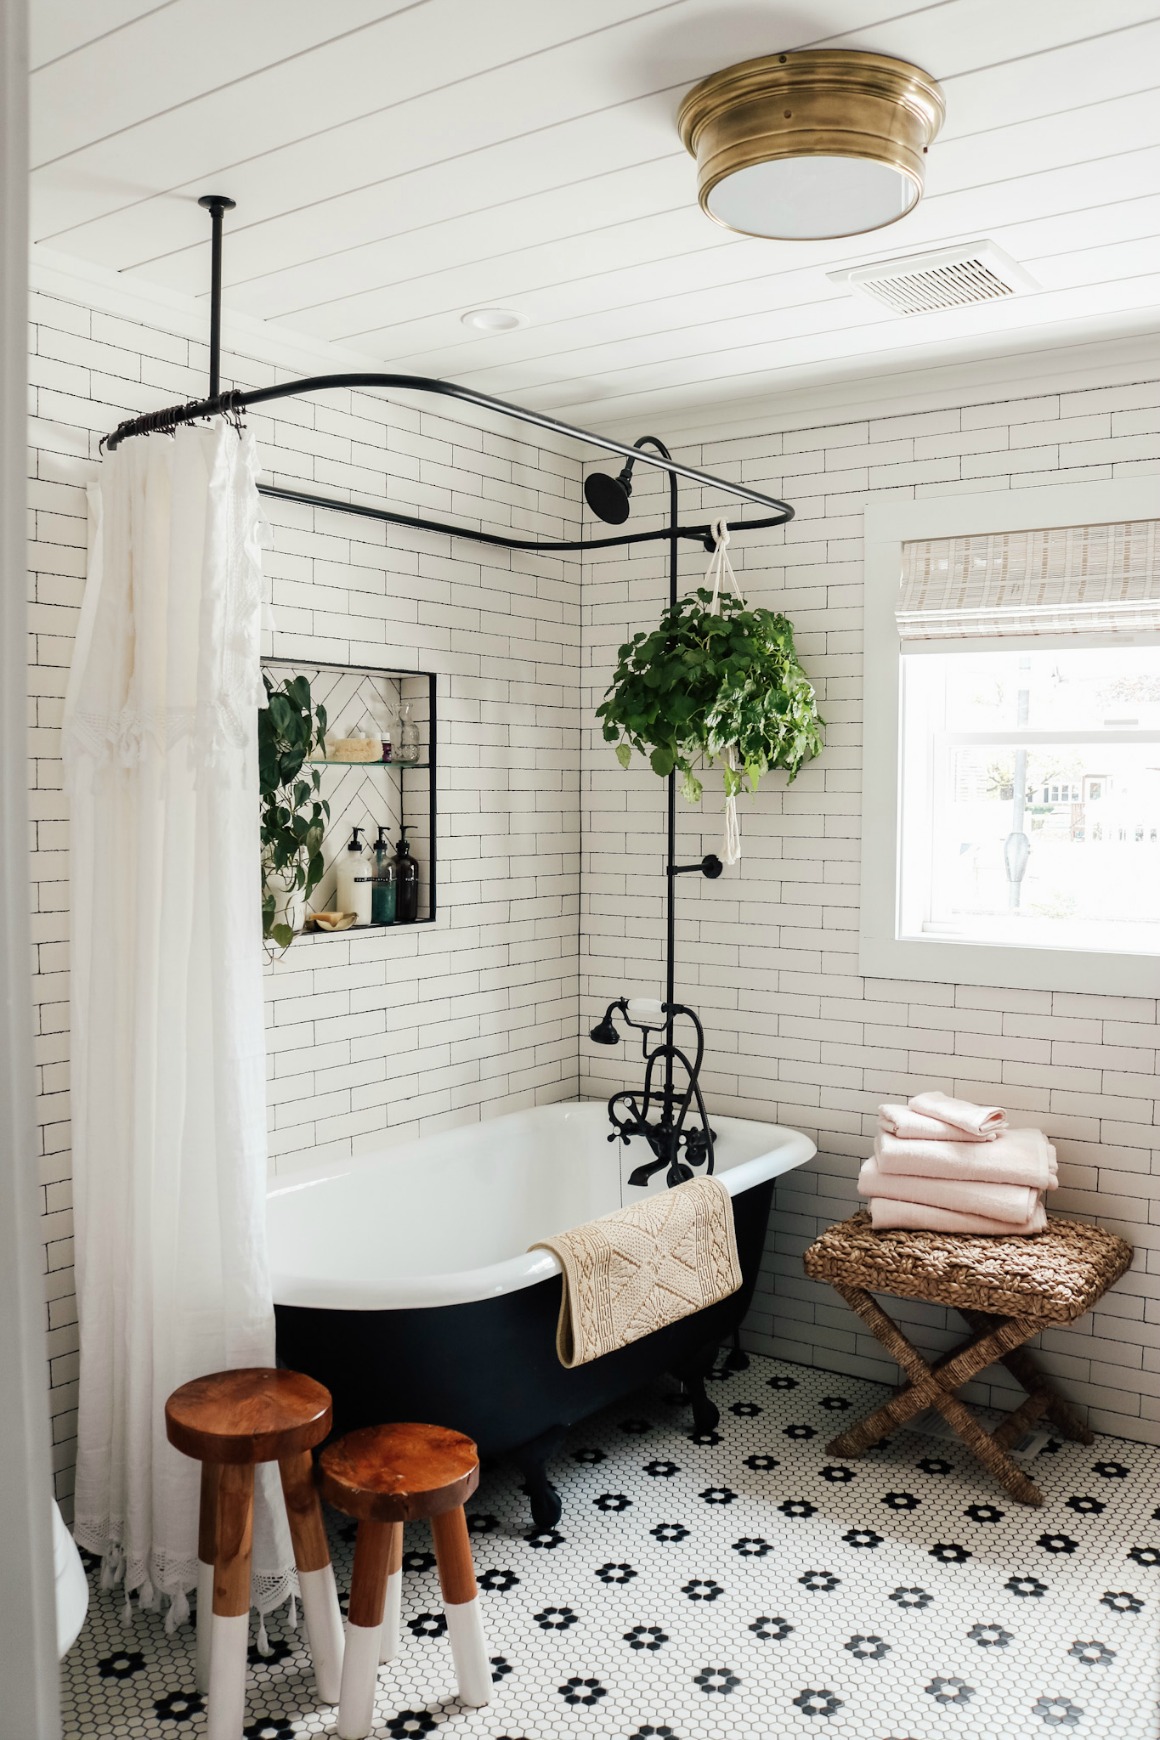 Master Bathroom Reveal with Claw Foot Tub